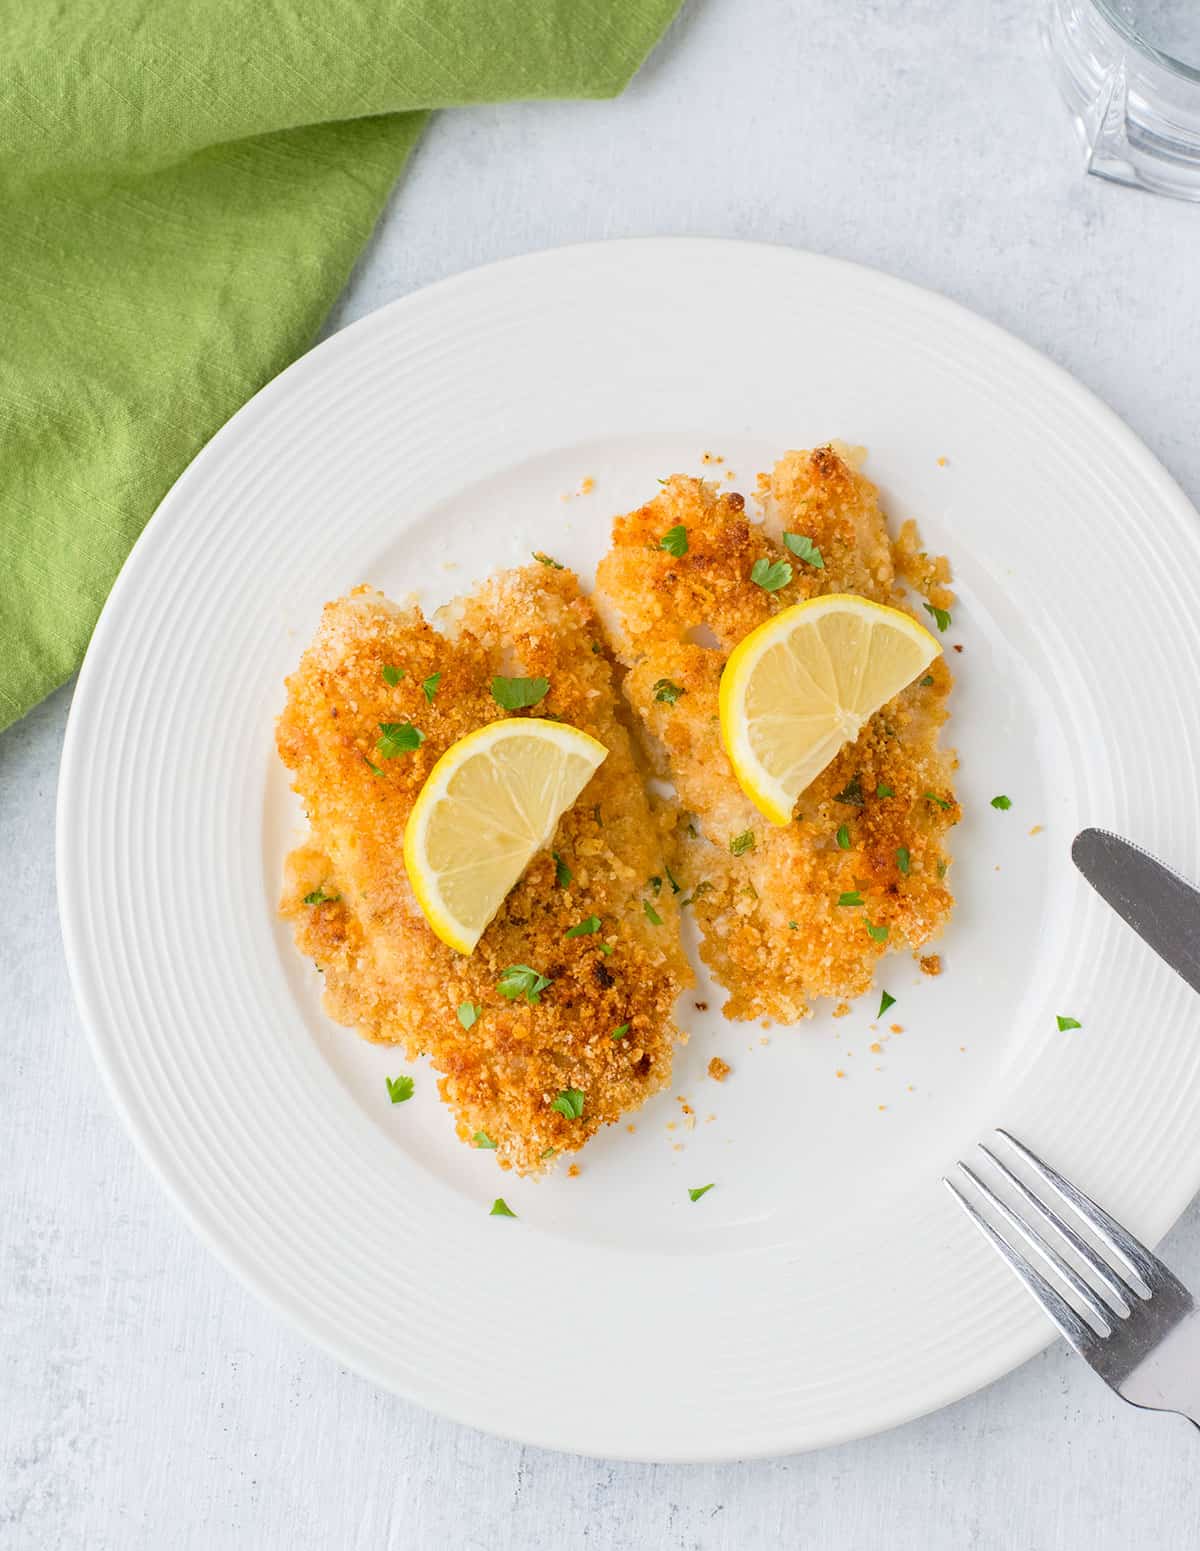 plate of cod with bread crumbs and lemon